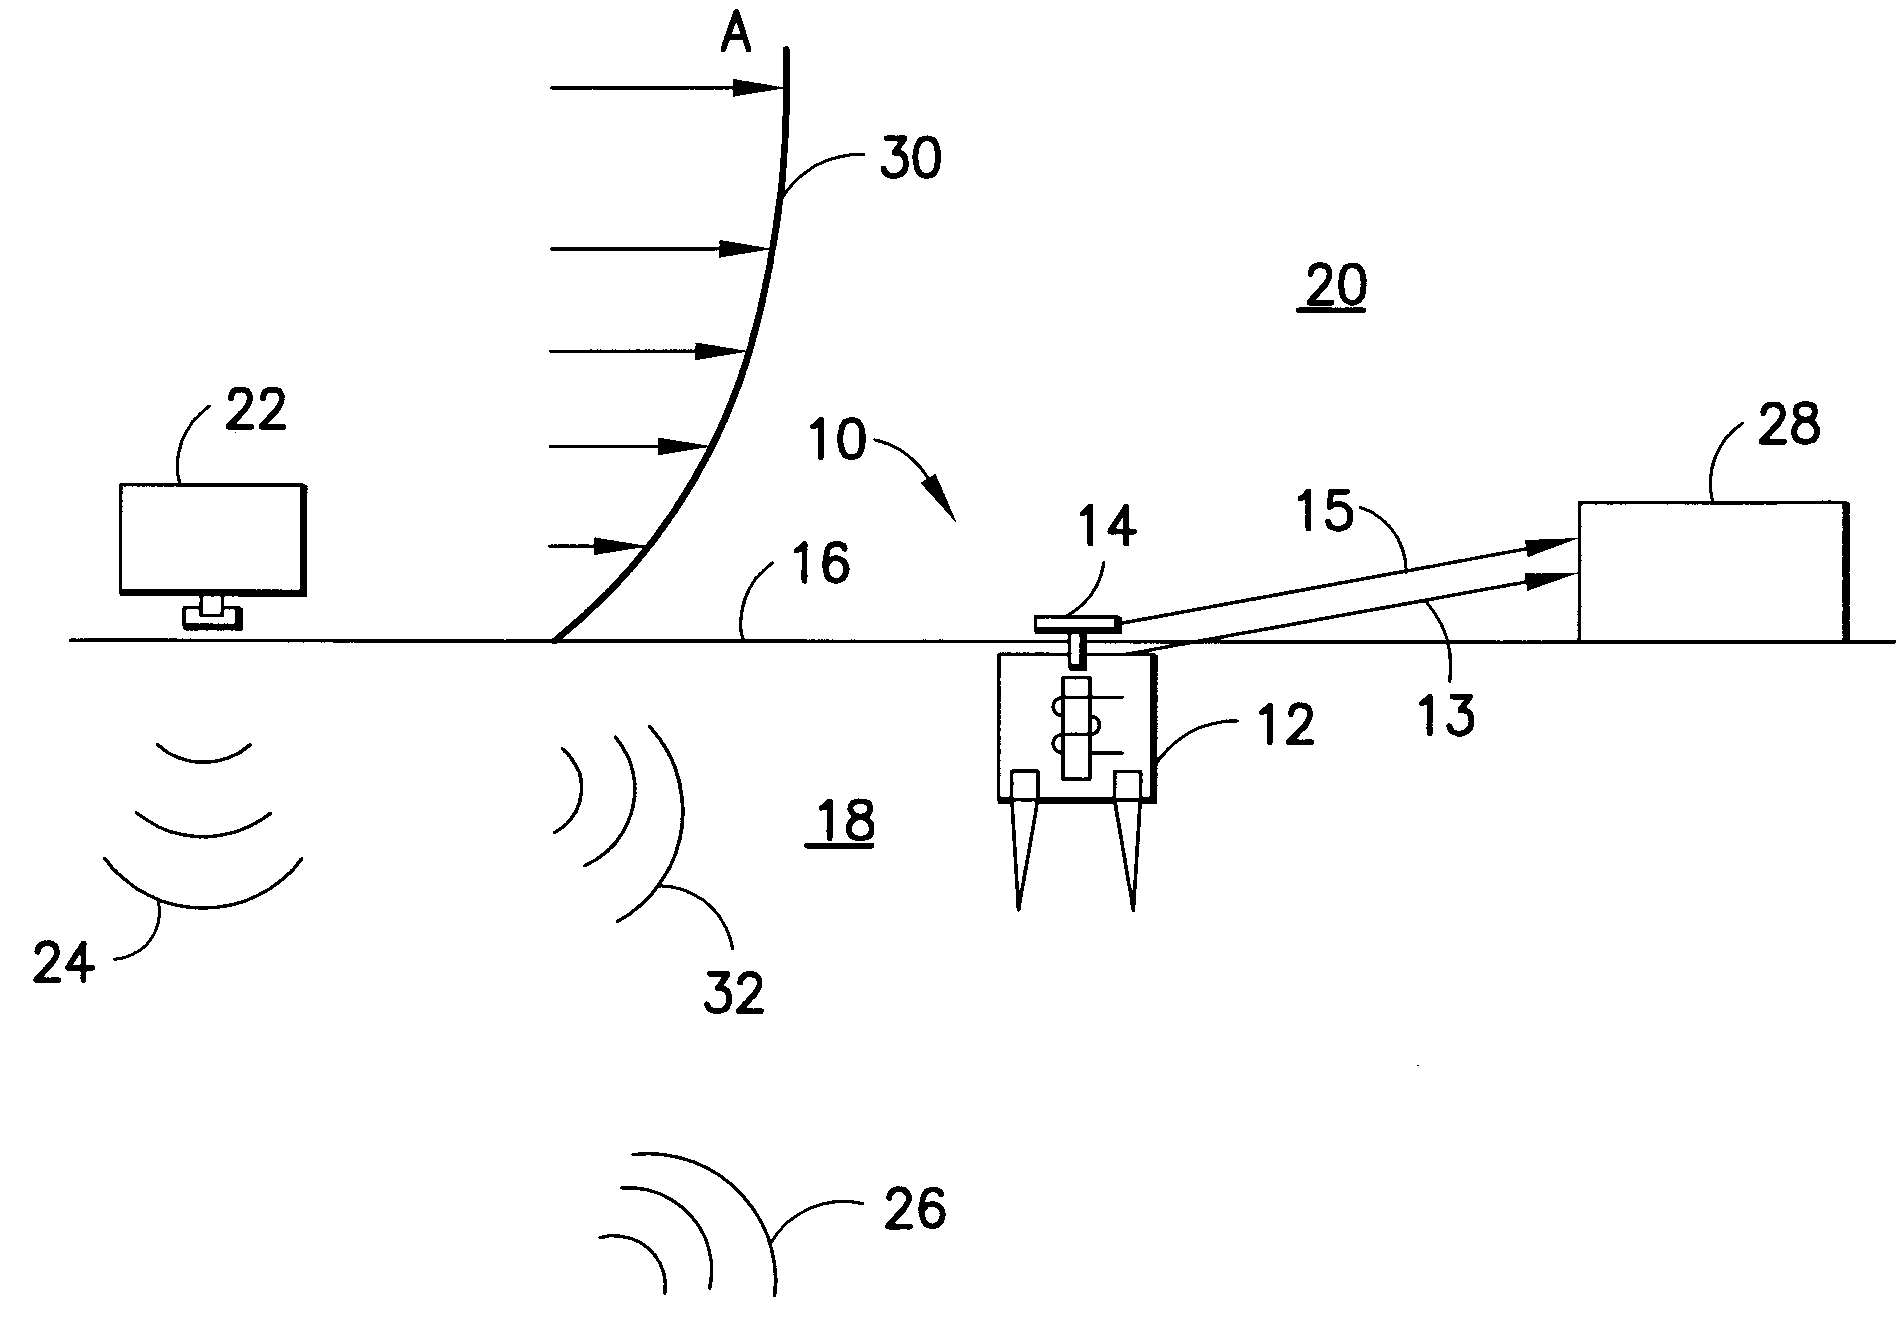 Apparatus and methods for attenuating seismic noise associated with atmospheric pressure fluctuations